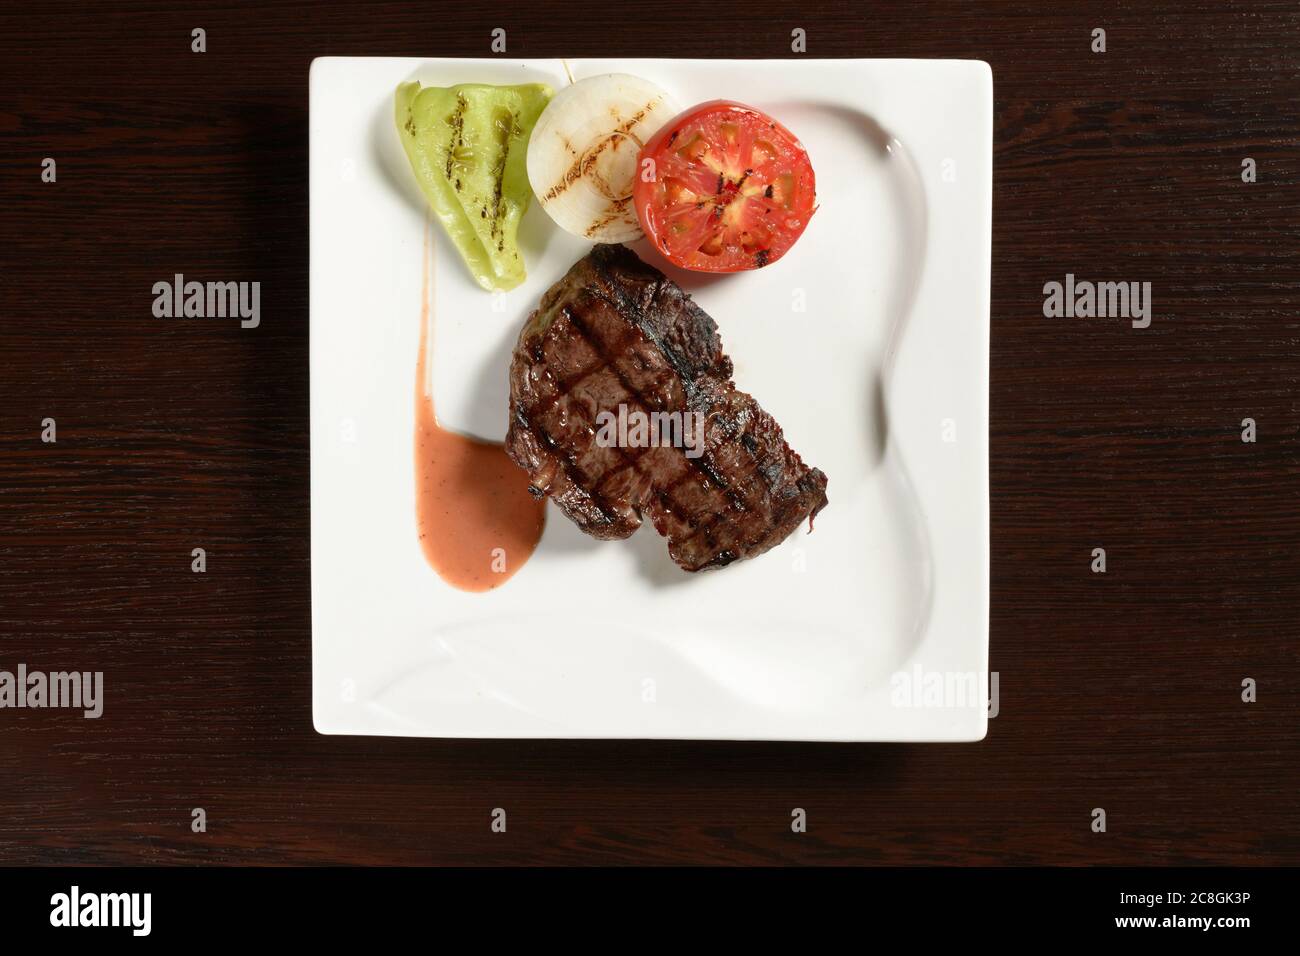 Roasted meat of marble beef steaks with grilled vegetables of tomato, onion and bell pepper on a square plate on a wooden table. Top view. Photos for Stock Photo